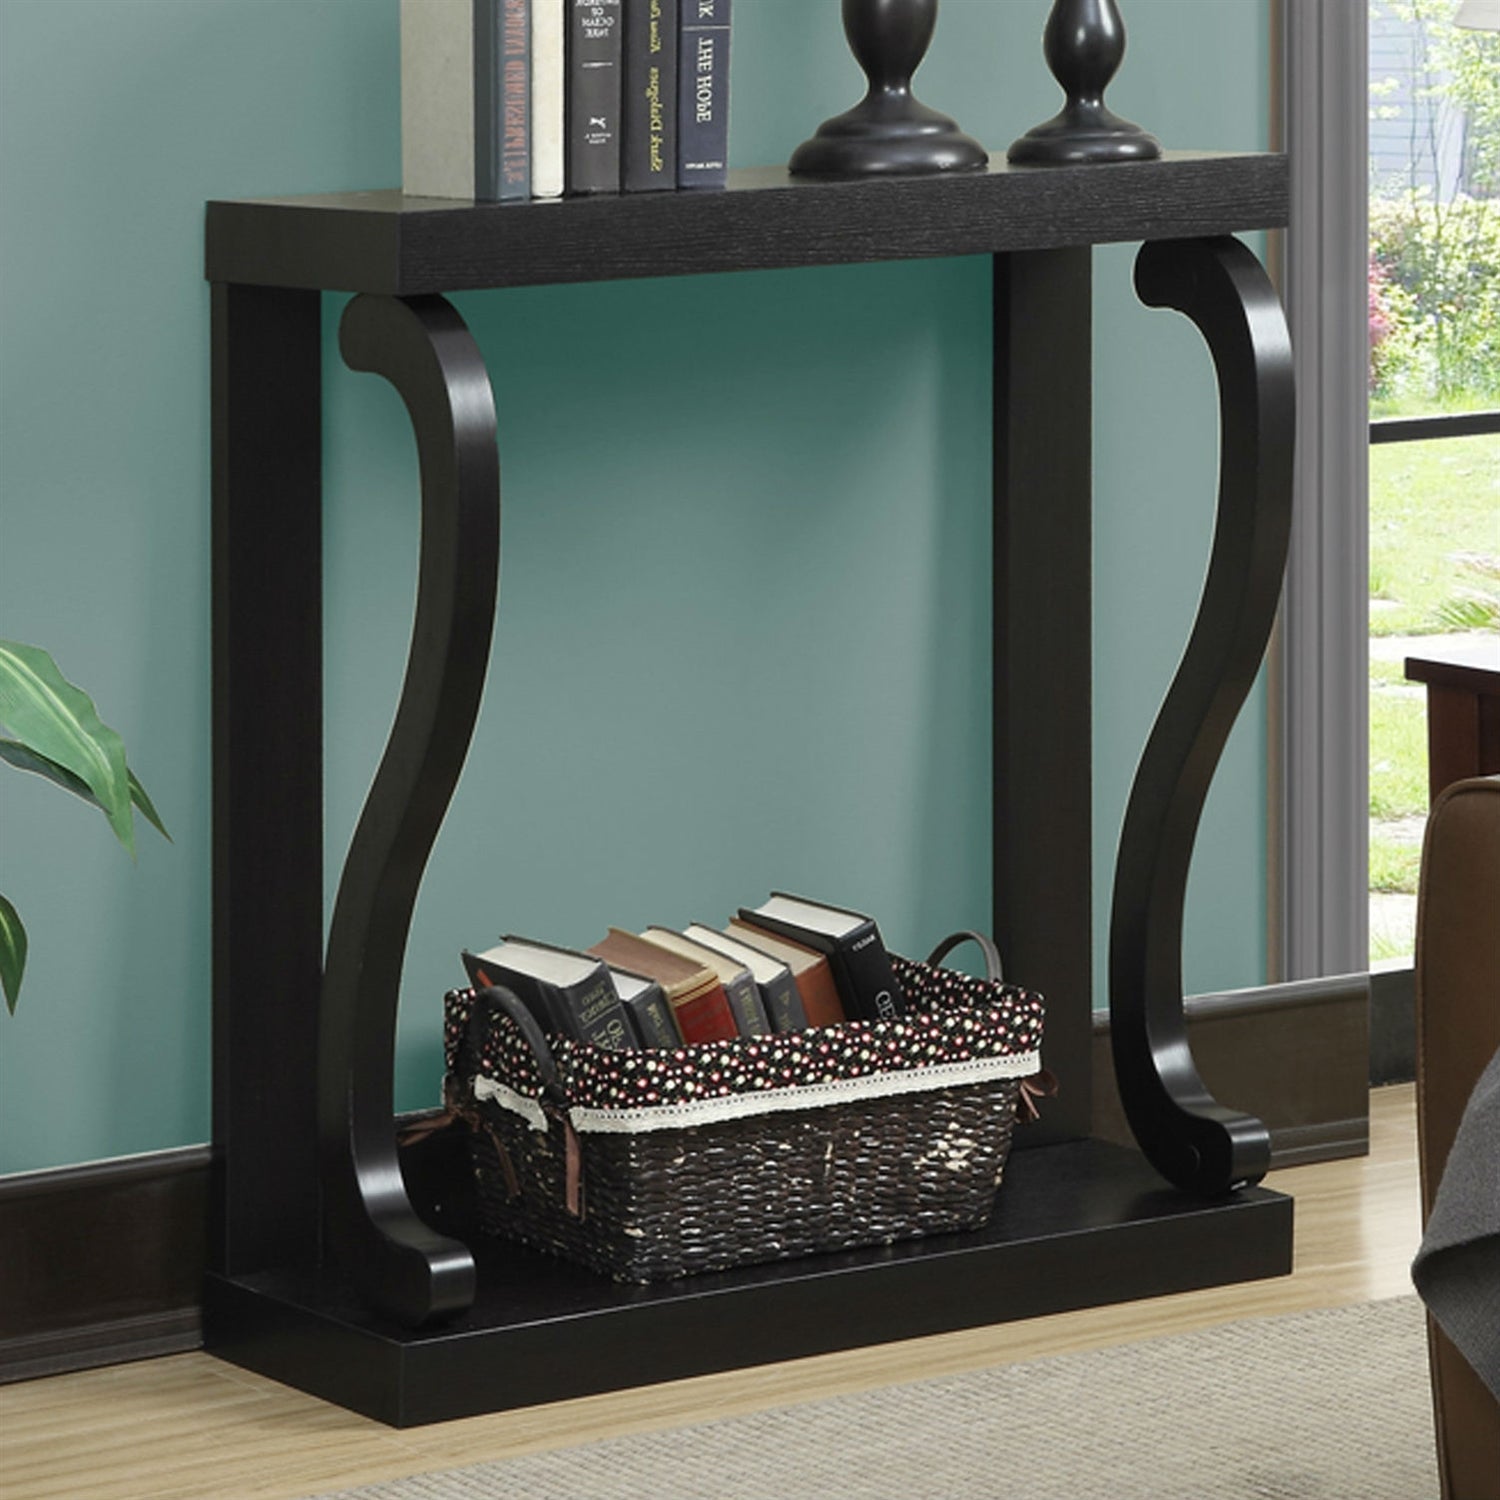 Living Room > Console & Sofa Tables - Modern Curved Legs Rich Espresso Console Table